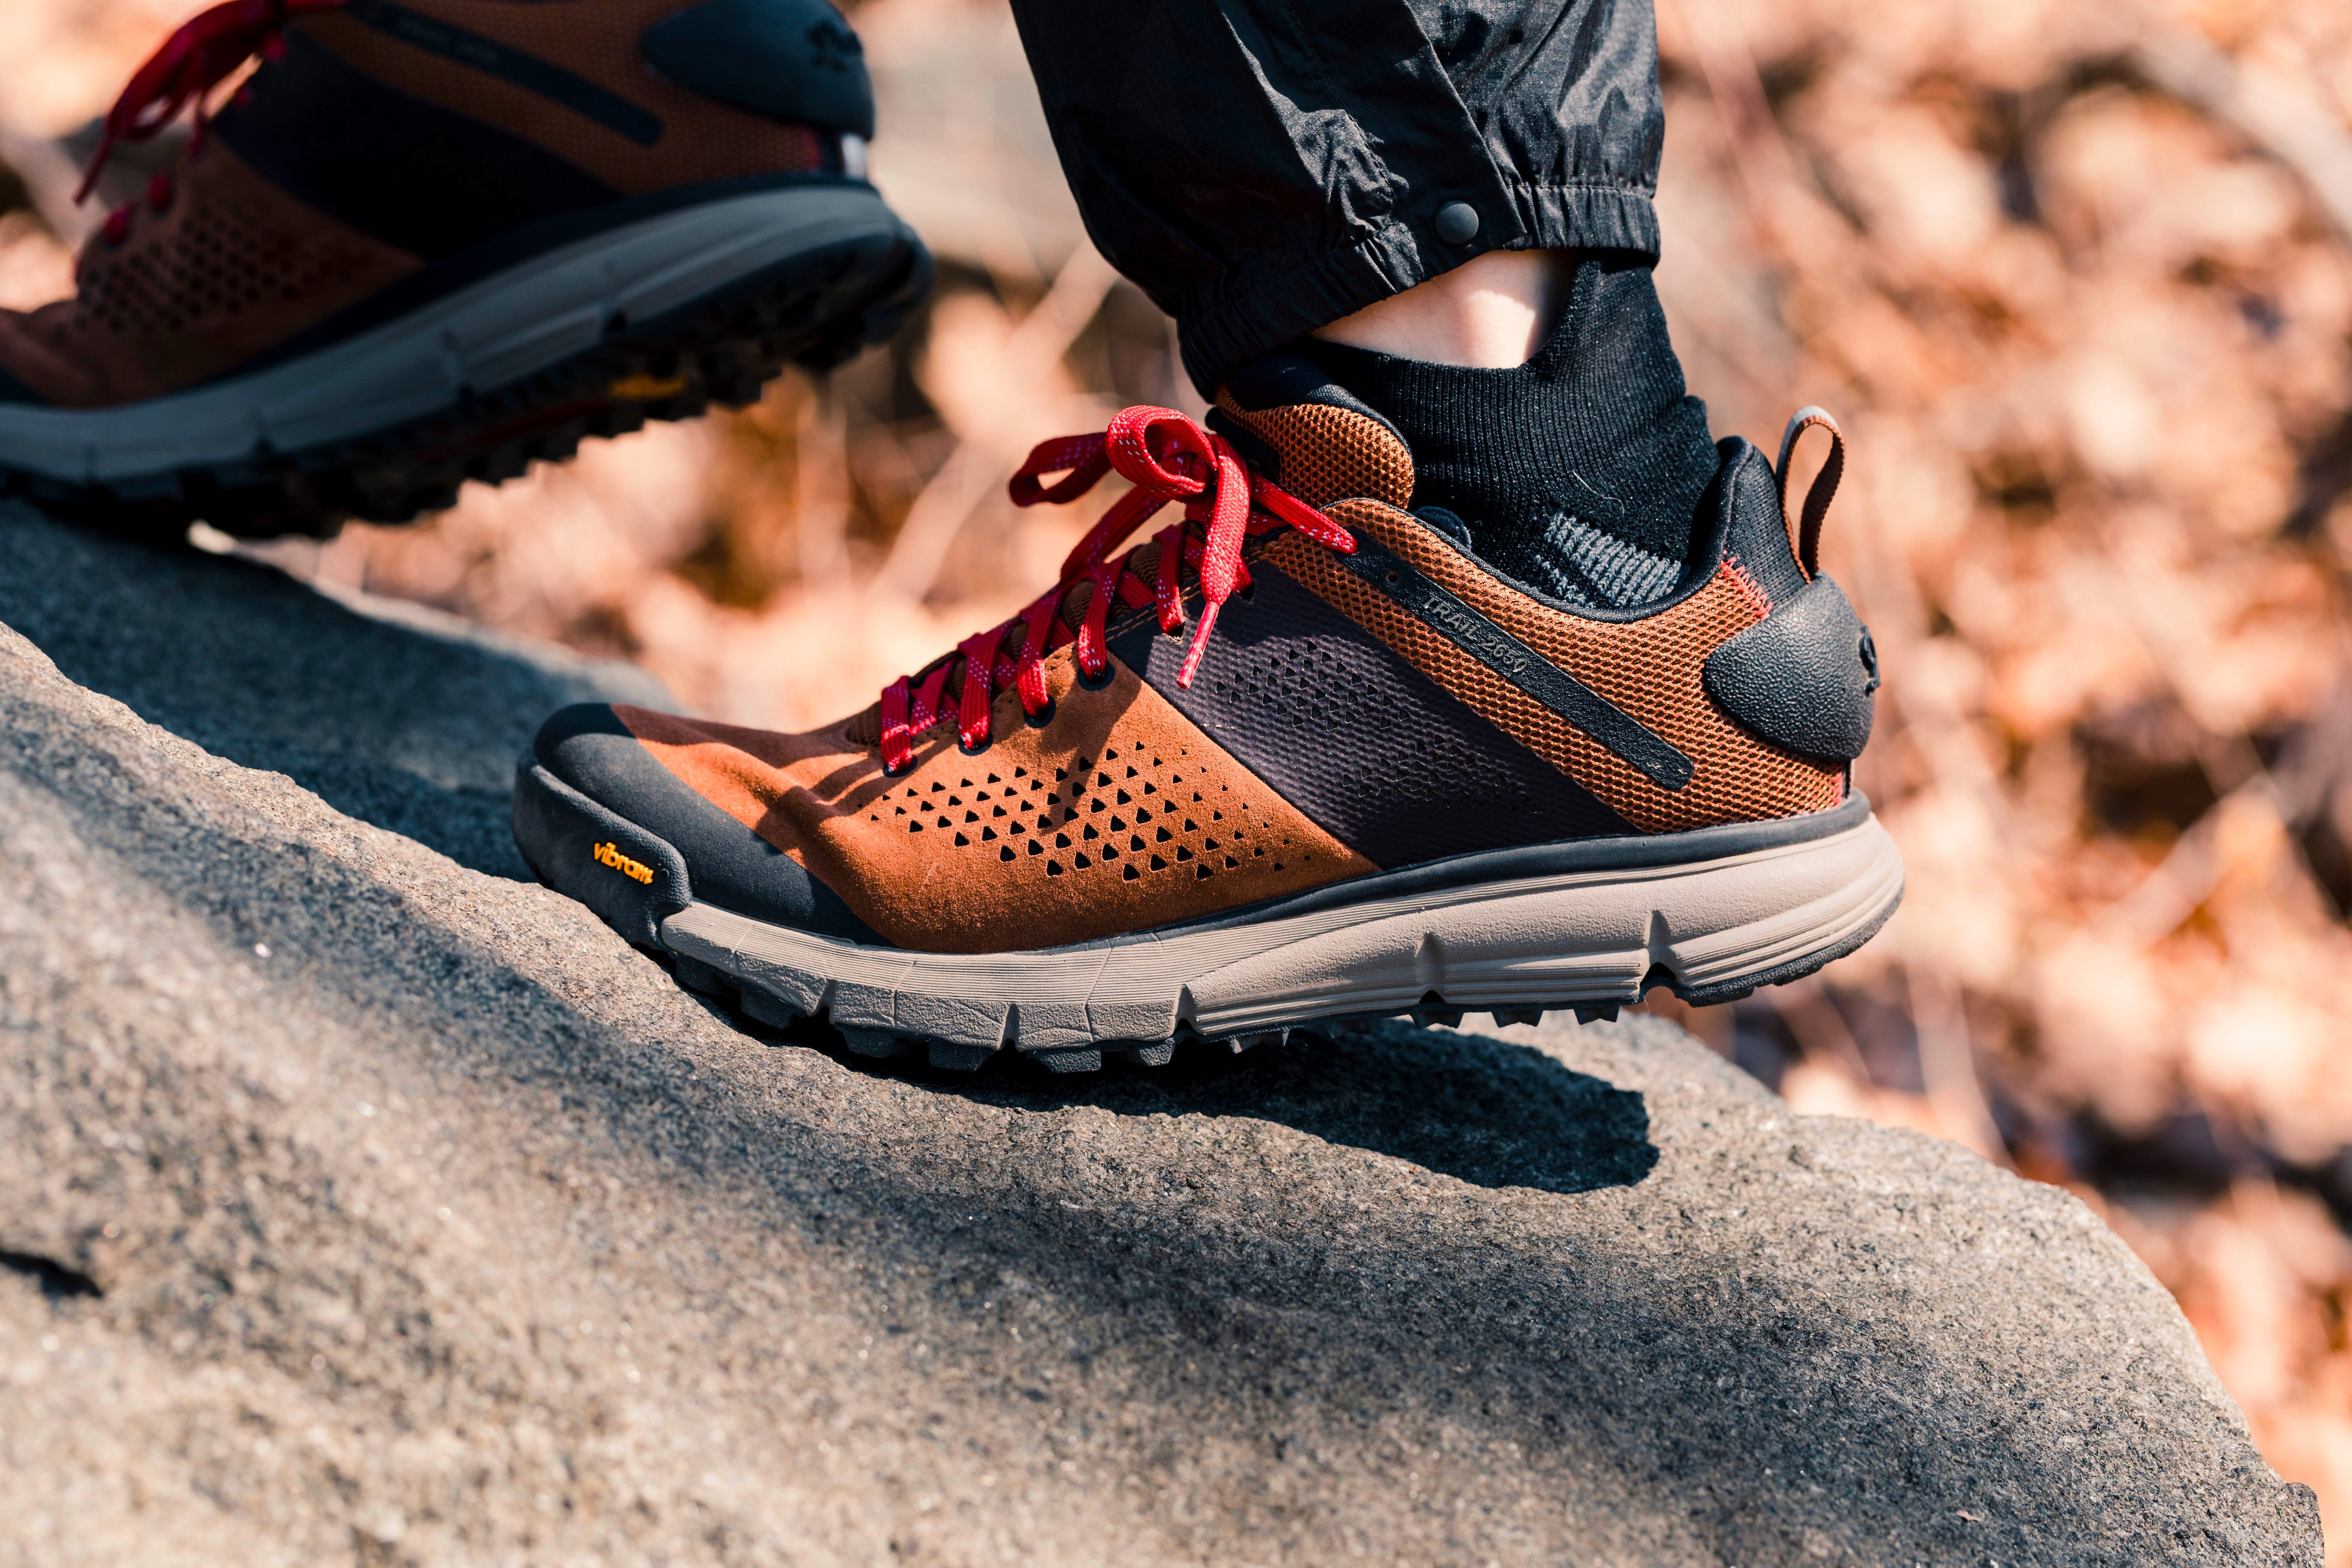 10 Pairs of Hiking Boots We'd Wear All the Time